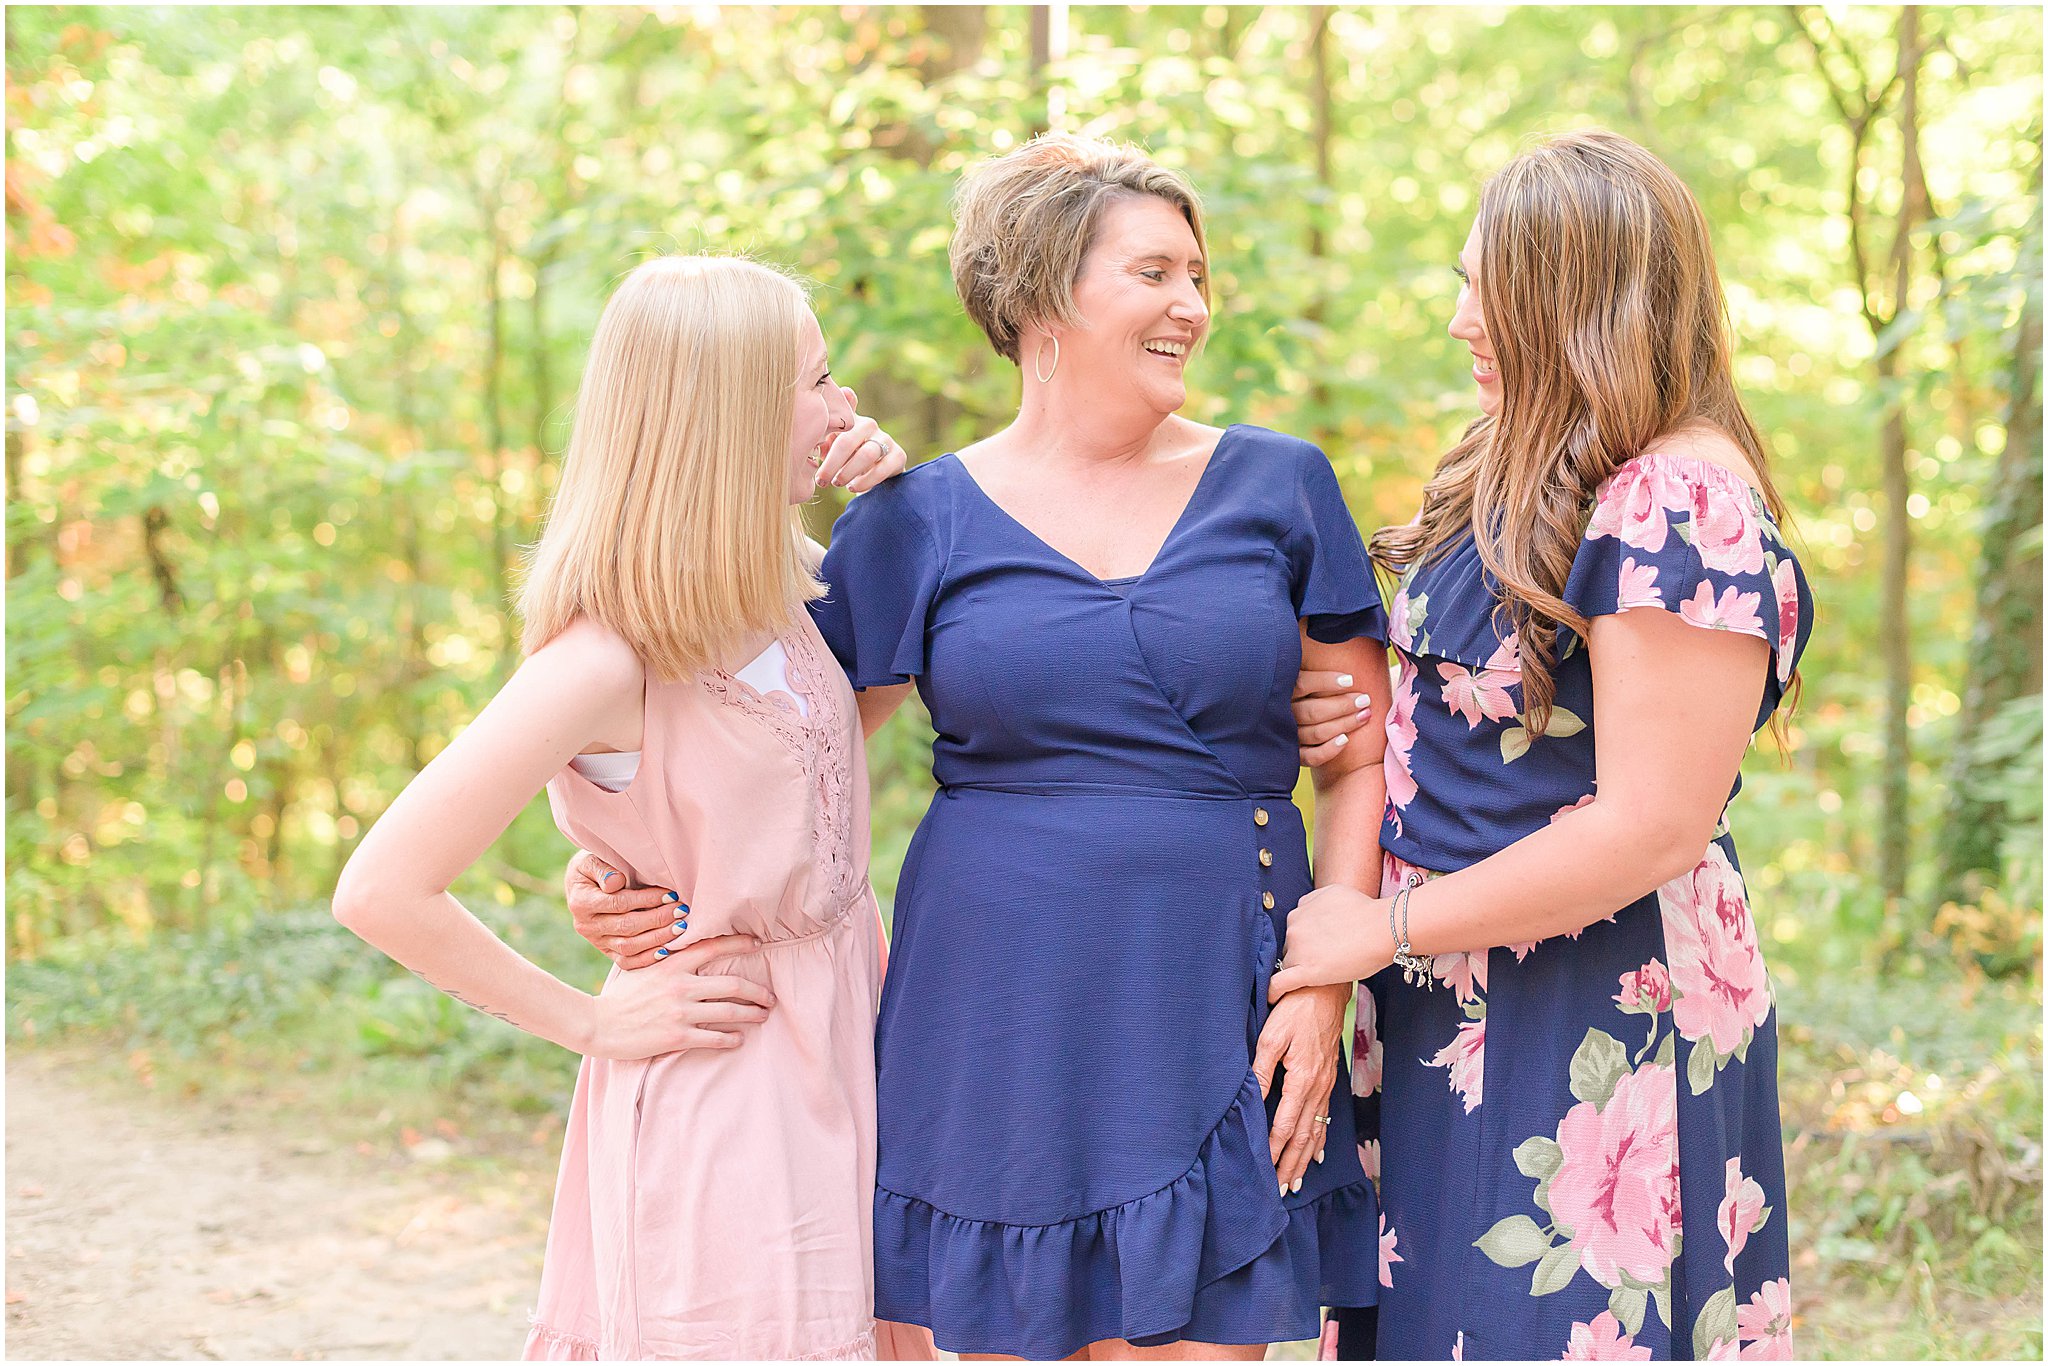 Mom laughing with daughters Holcomb Gardens family session